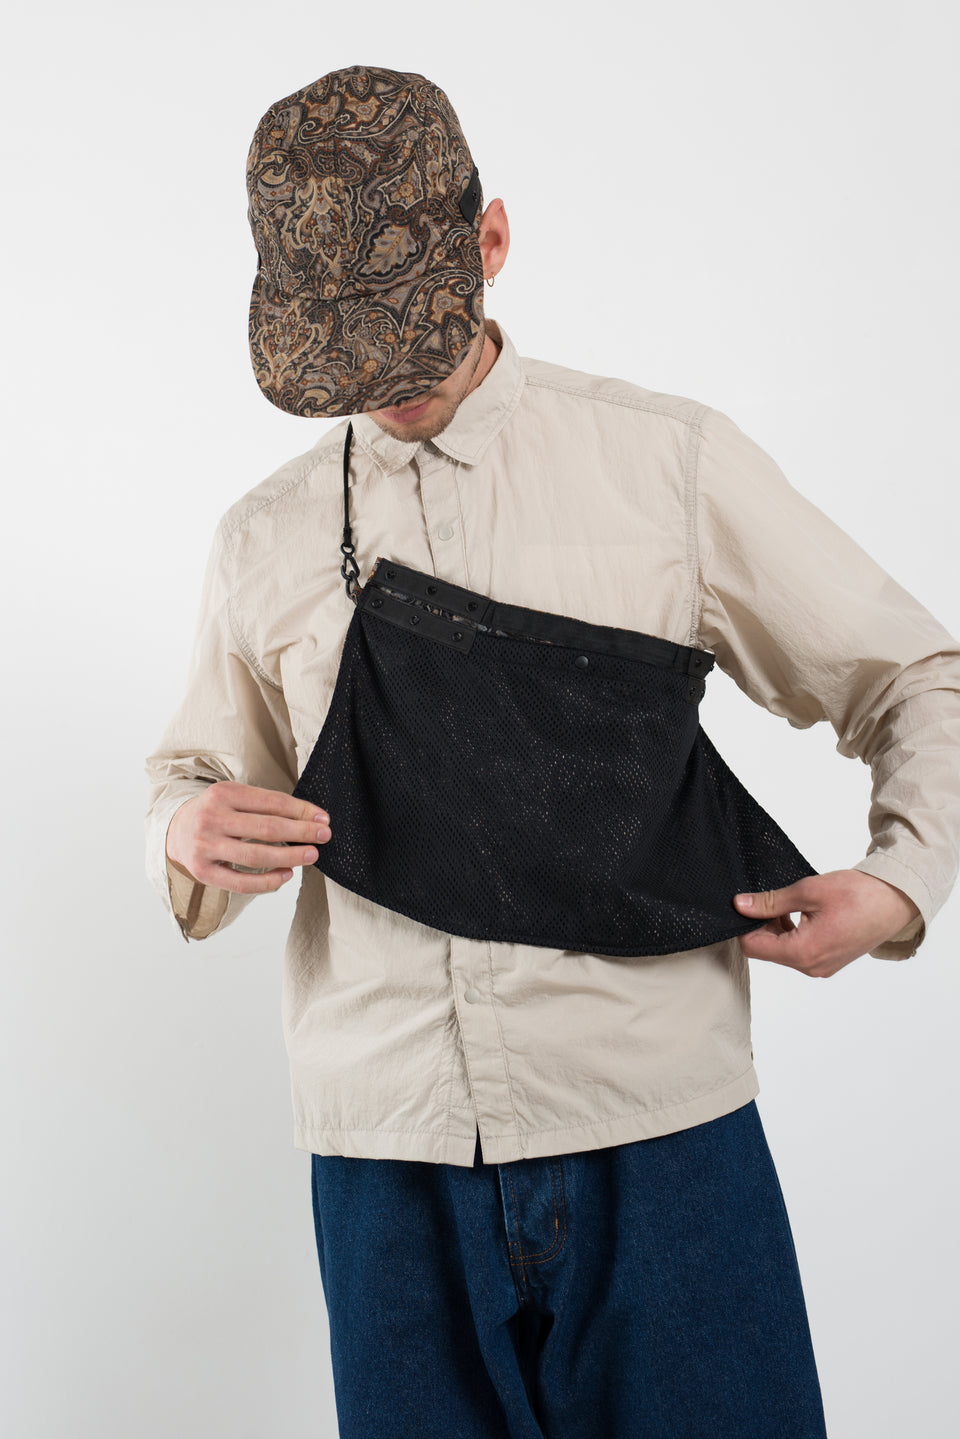 Found Feather SS22 Japan 4 Panel Packable Awning Cap Brown Paisley Calculus Victoria BC Canada